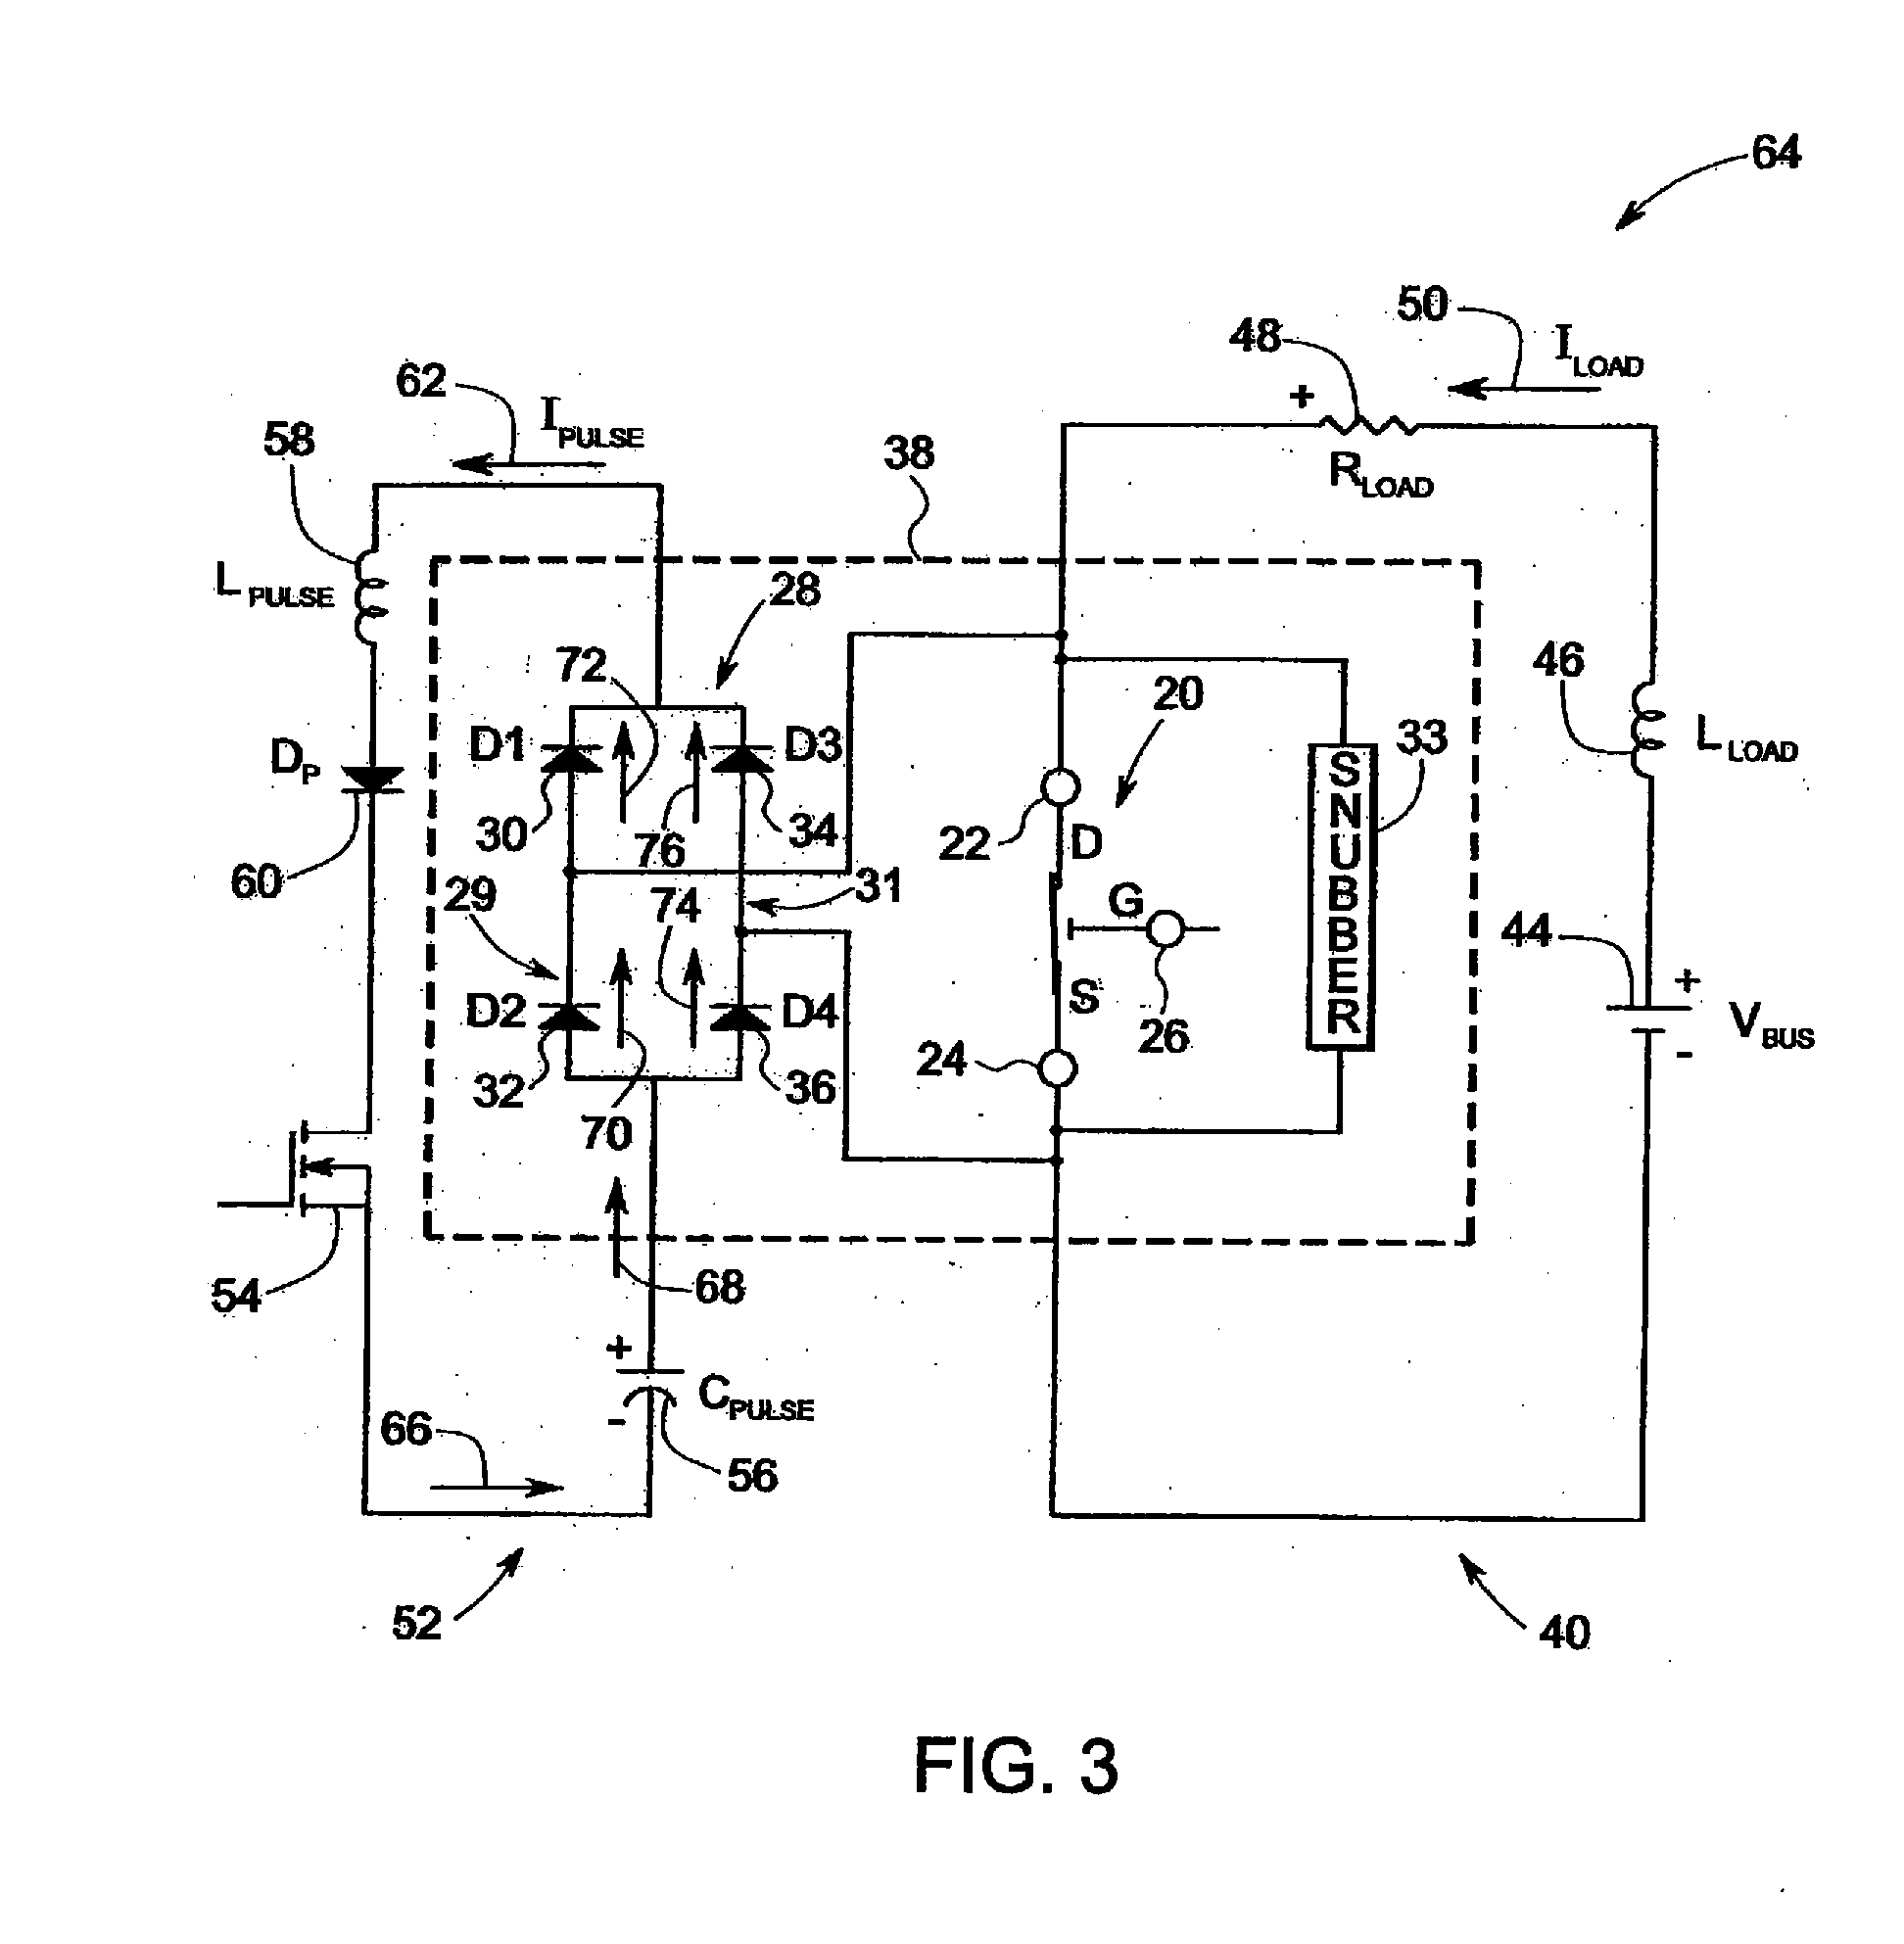 Electromechanical Switching Circuitry In Parallel With Solid State Switching Circuitry Selectively Switchable To Carry A Load Current Appropriate To Such Circuitry